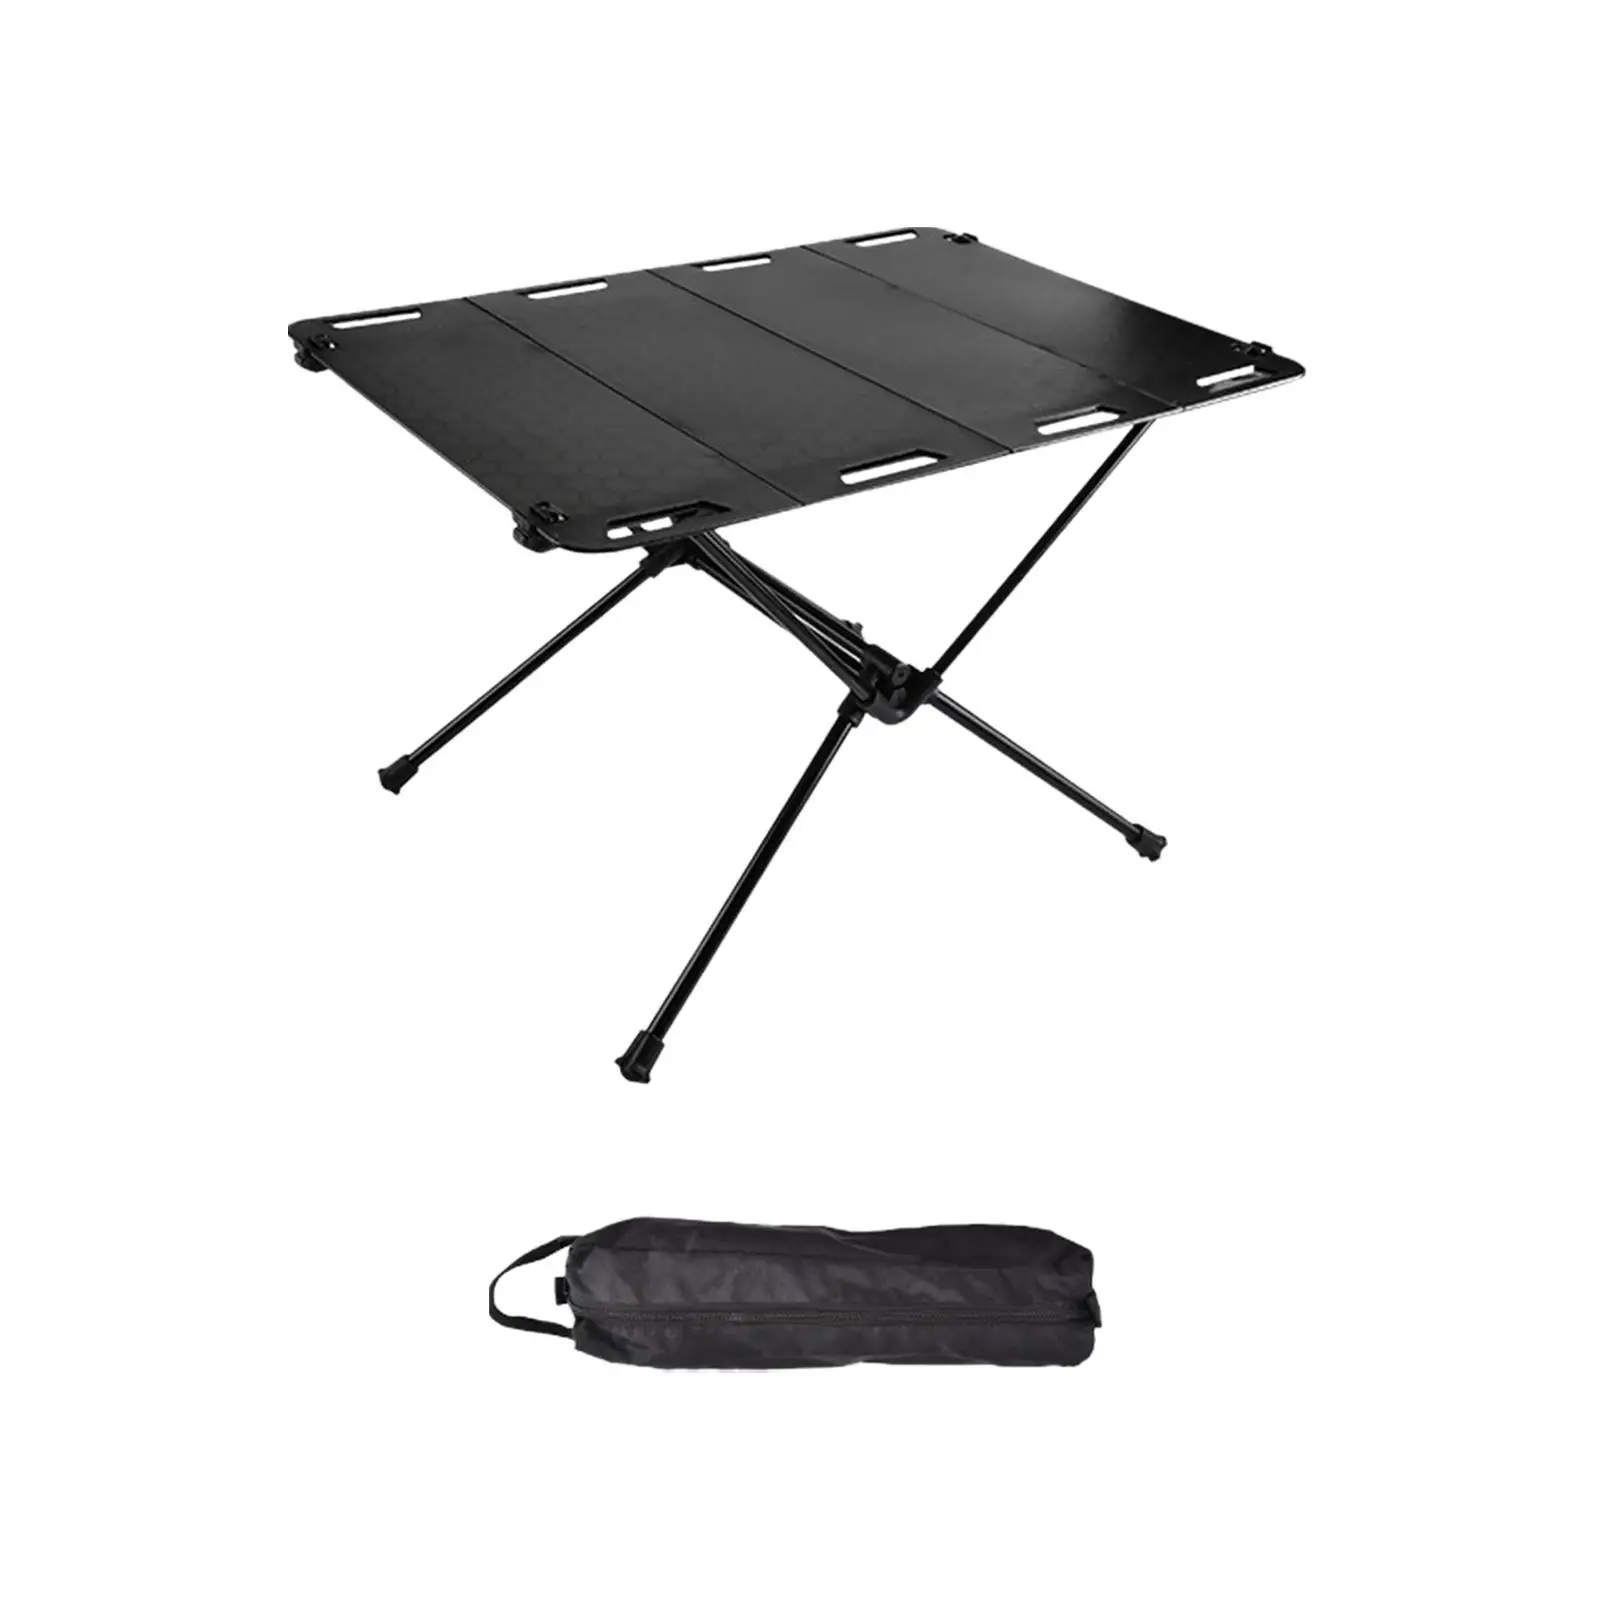 Foldable Camping Table Portable Desk Outdoor Foldable Table Beach Table for Picnic Backyard Fishing Garden Yard